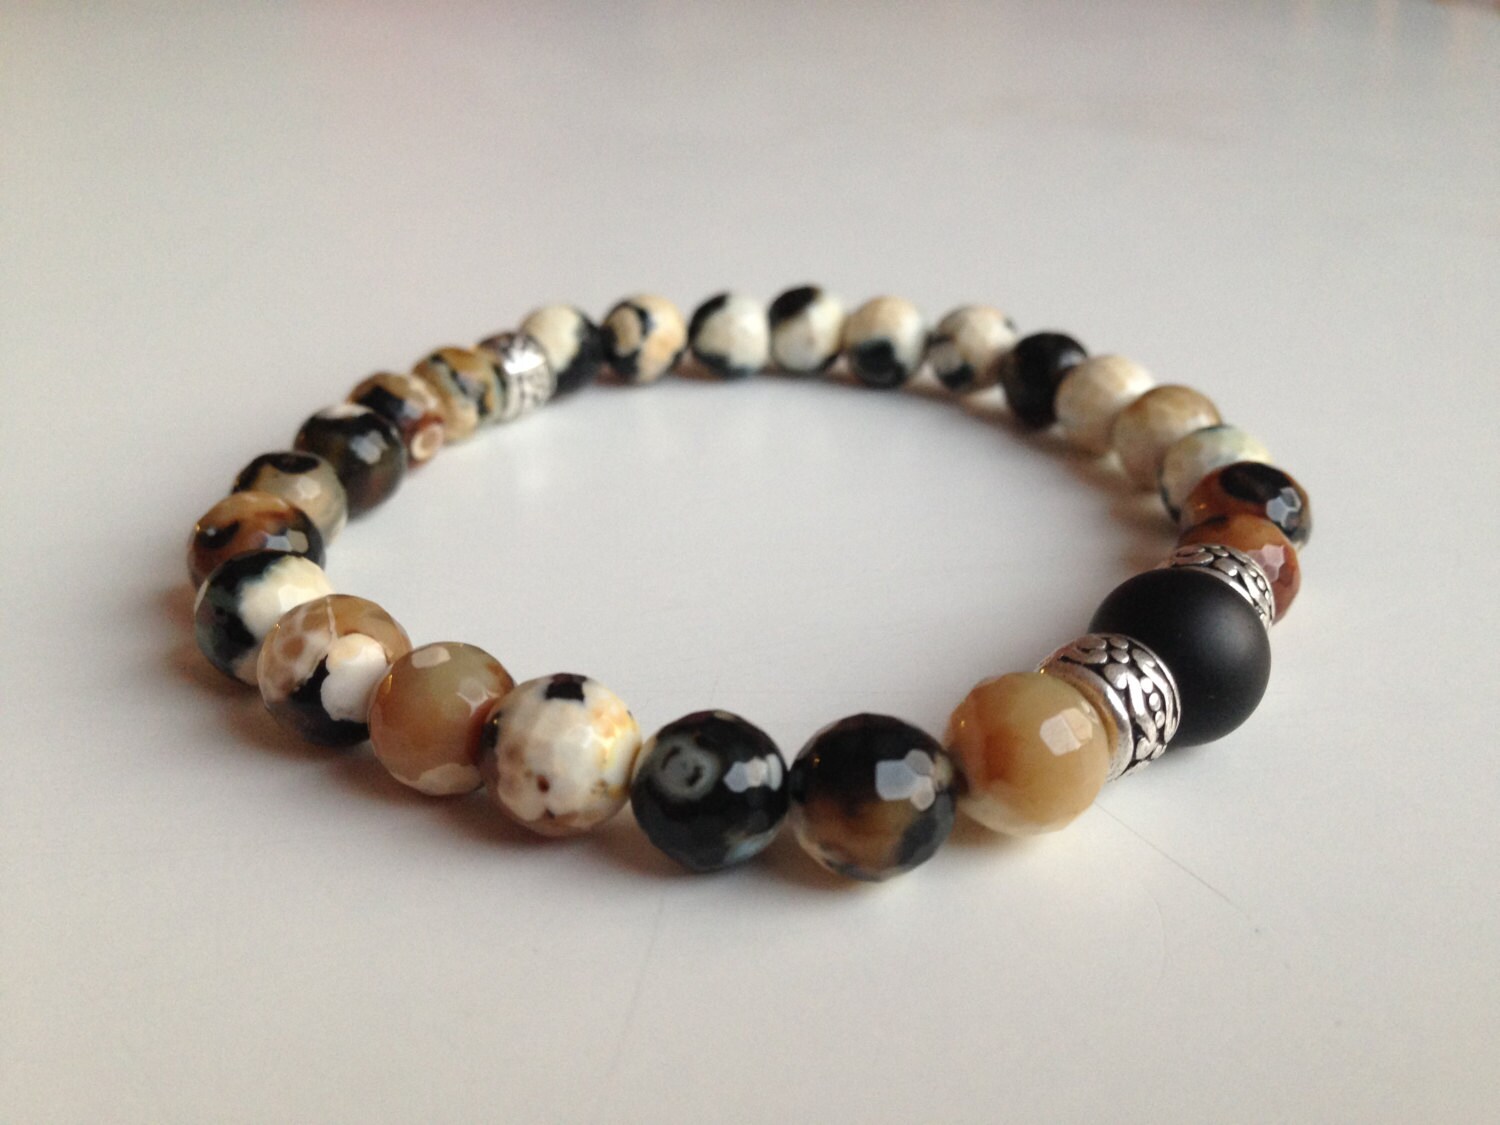 Black onyx and fire agate Men's bracelet by GinasCreativeDesigns